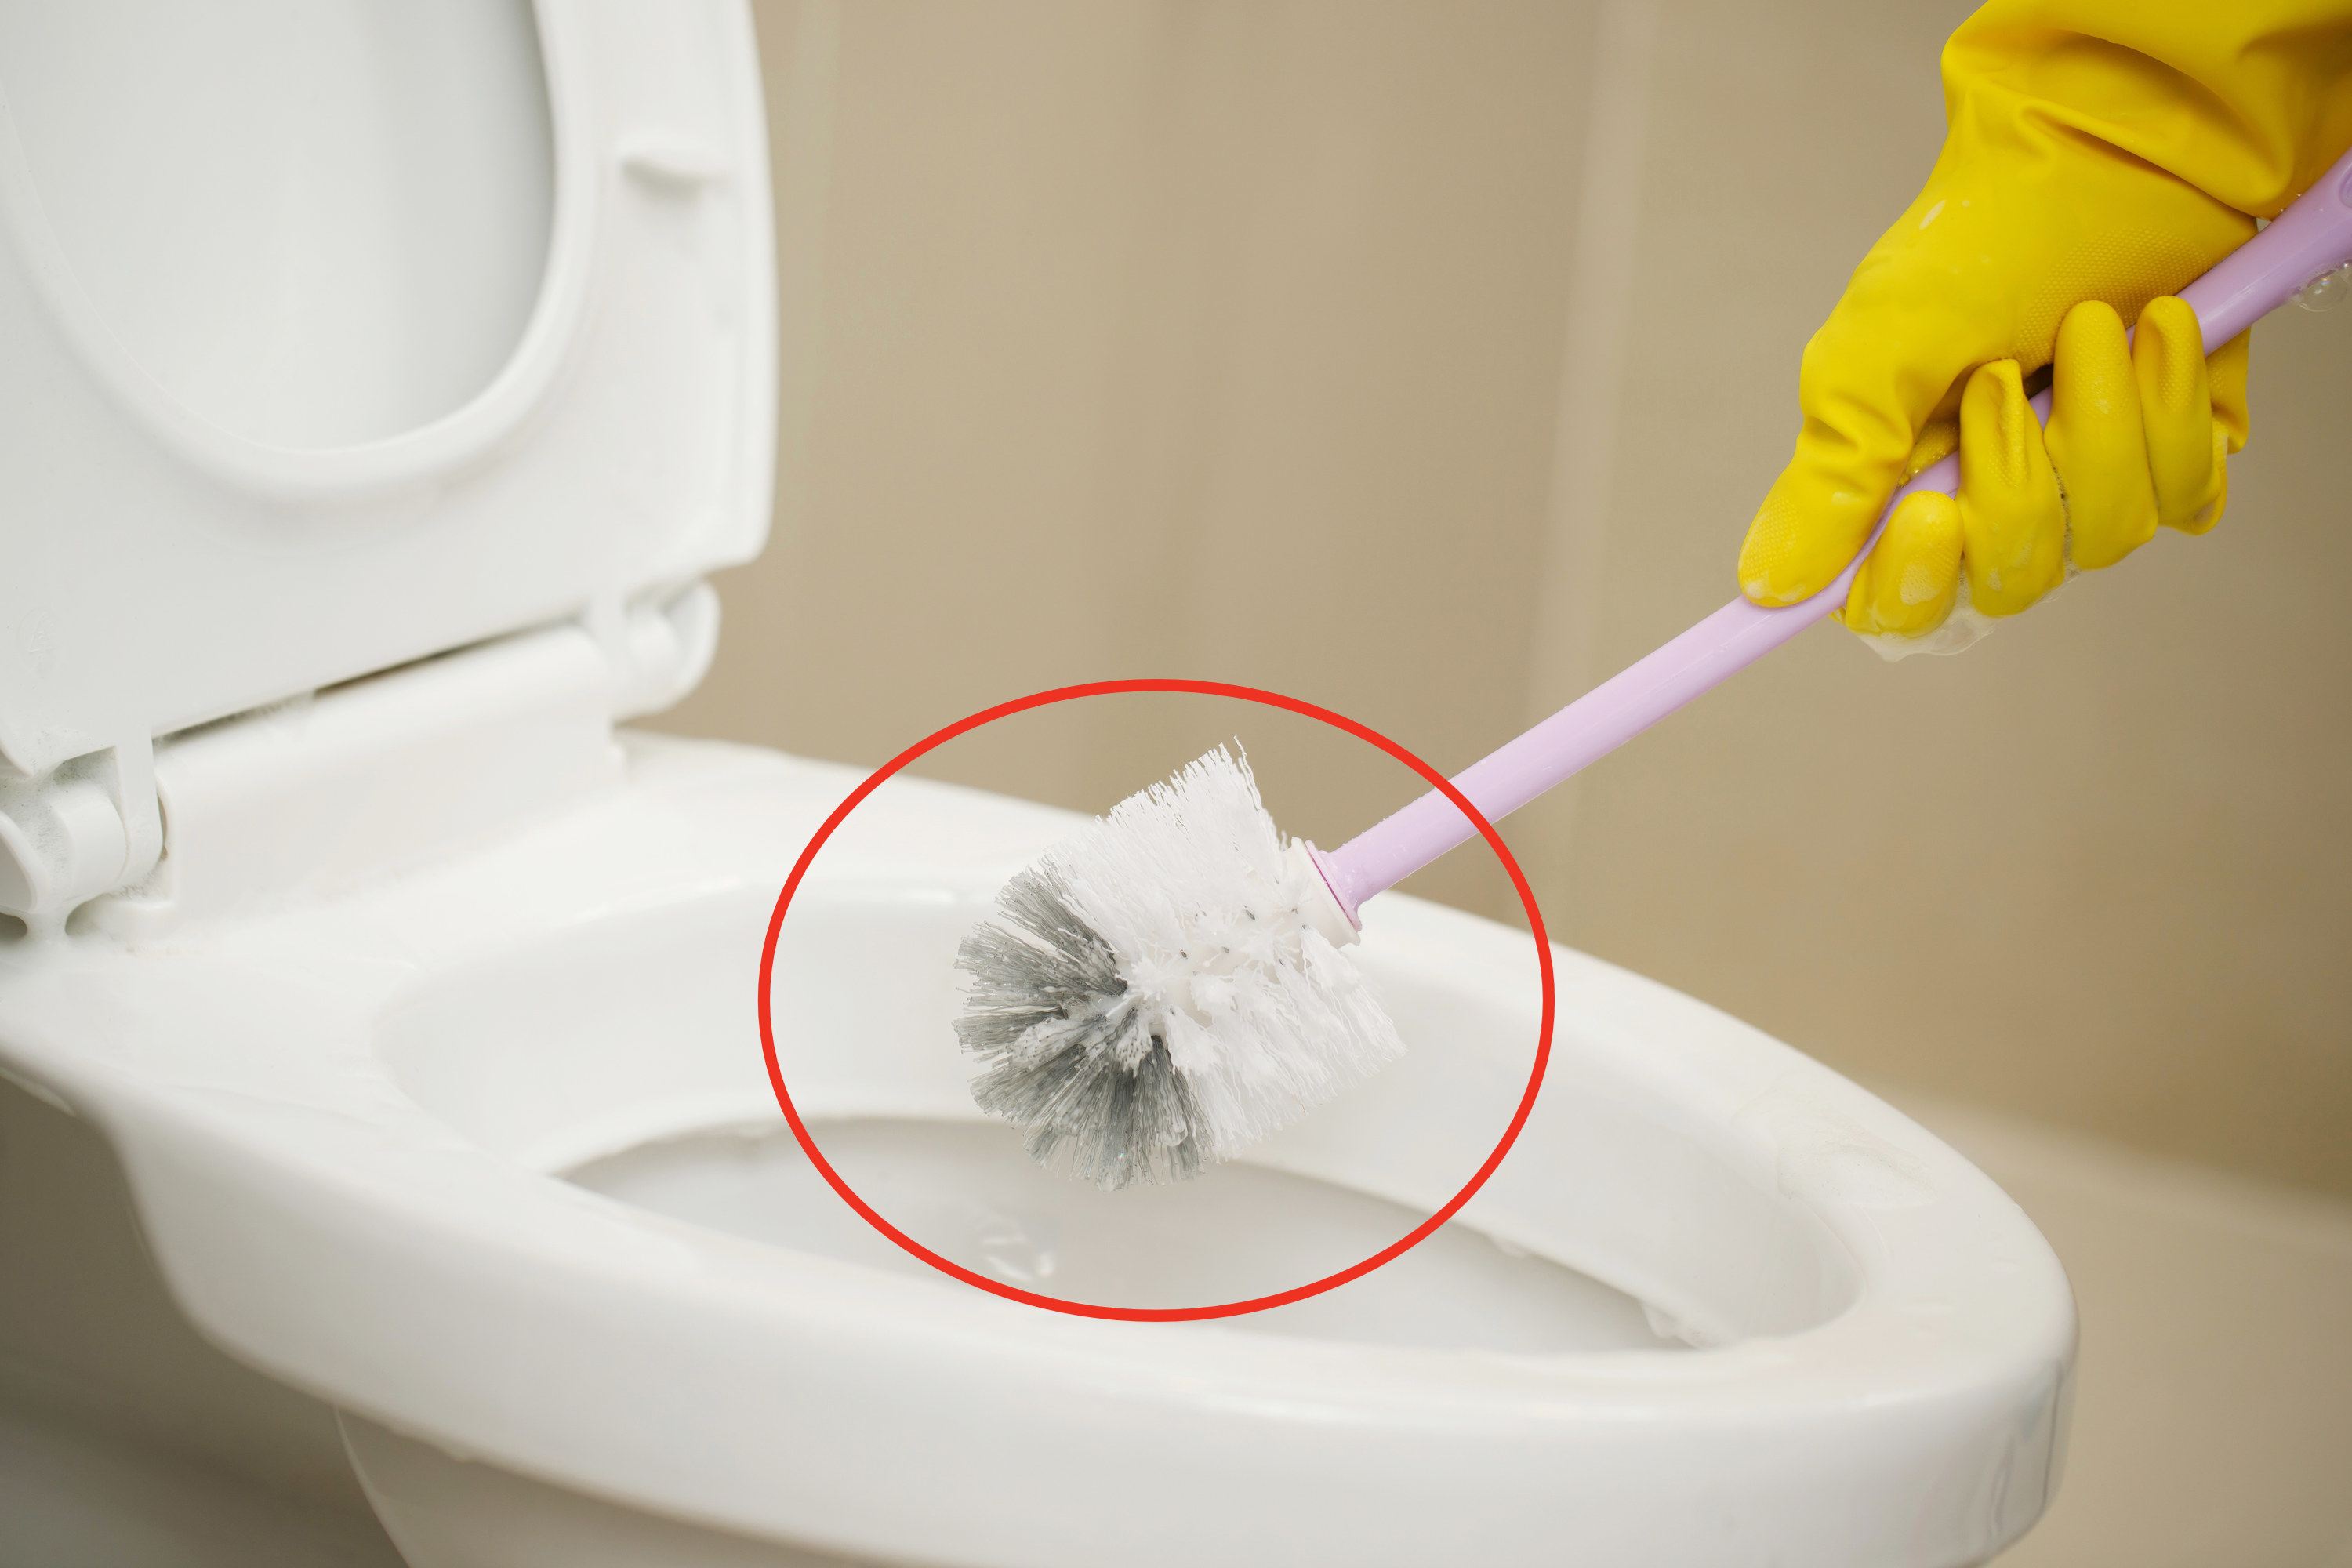 A rubber-gloved hand holding a toilet brush positioned above a toilet as if about to clean it